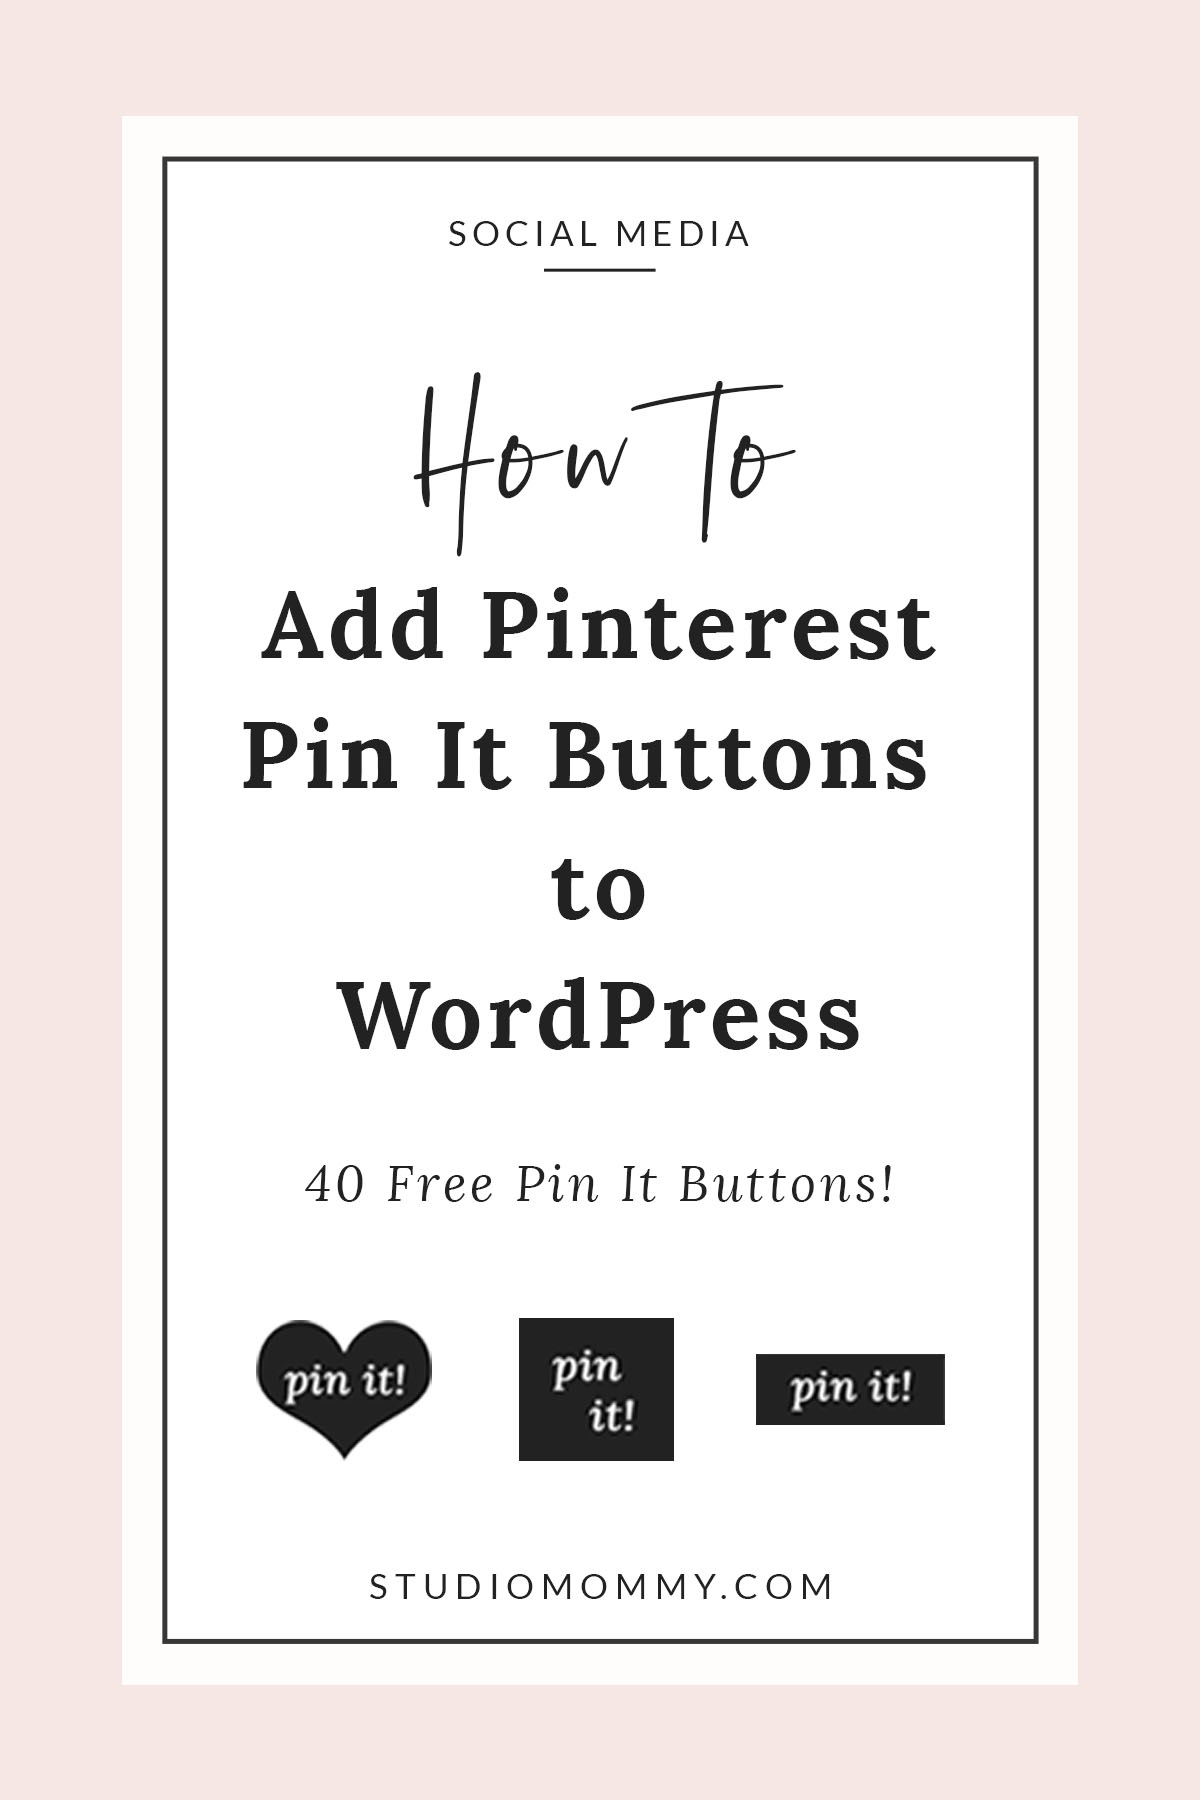 One of the ways you can up your game in Pinterest is to add a “Pin It” button on your images. This allows a quick and easy way for your visitors to pin your content. You can use the basic Pin It button from Pinterest but it may not flow or look as nice with your site. I’ve created a quick tutorial below so that you can easily add your own Pin It button. Plus if you click on the image below you will receive 40 custom Pin It buttons that I created. Lets get started and add this Pin It button to your site! I’m so excited for you!!